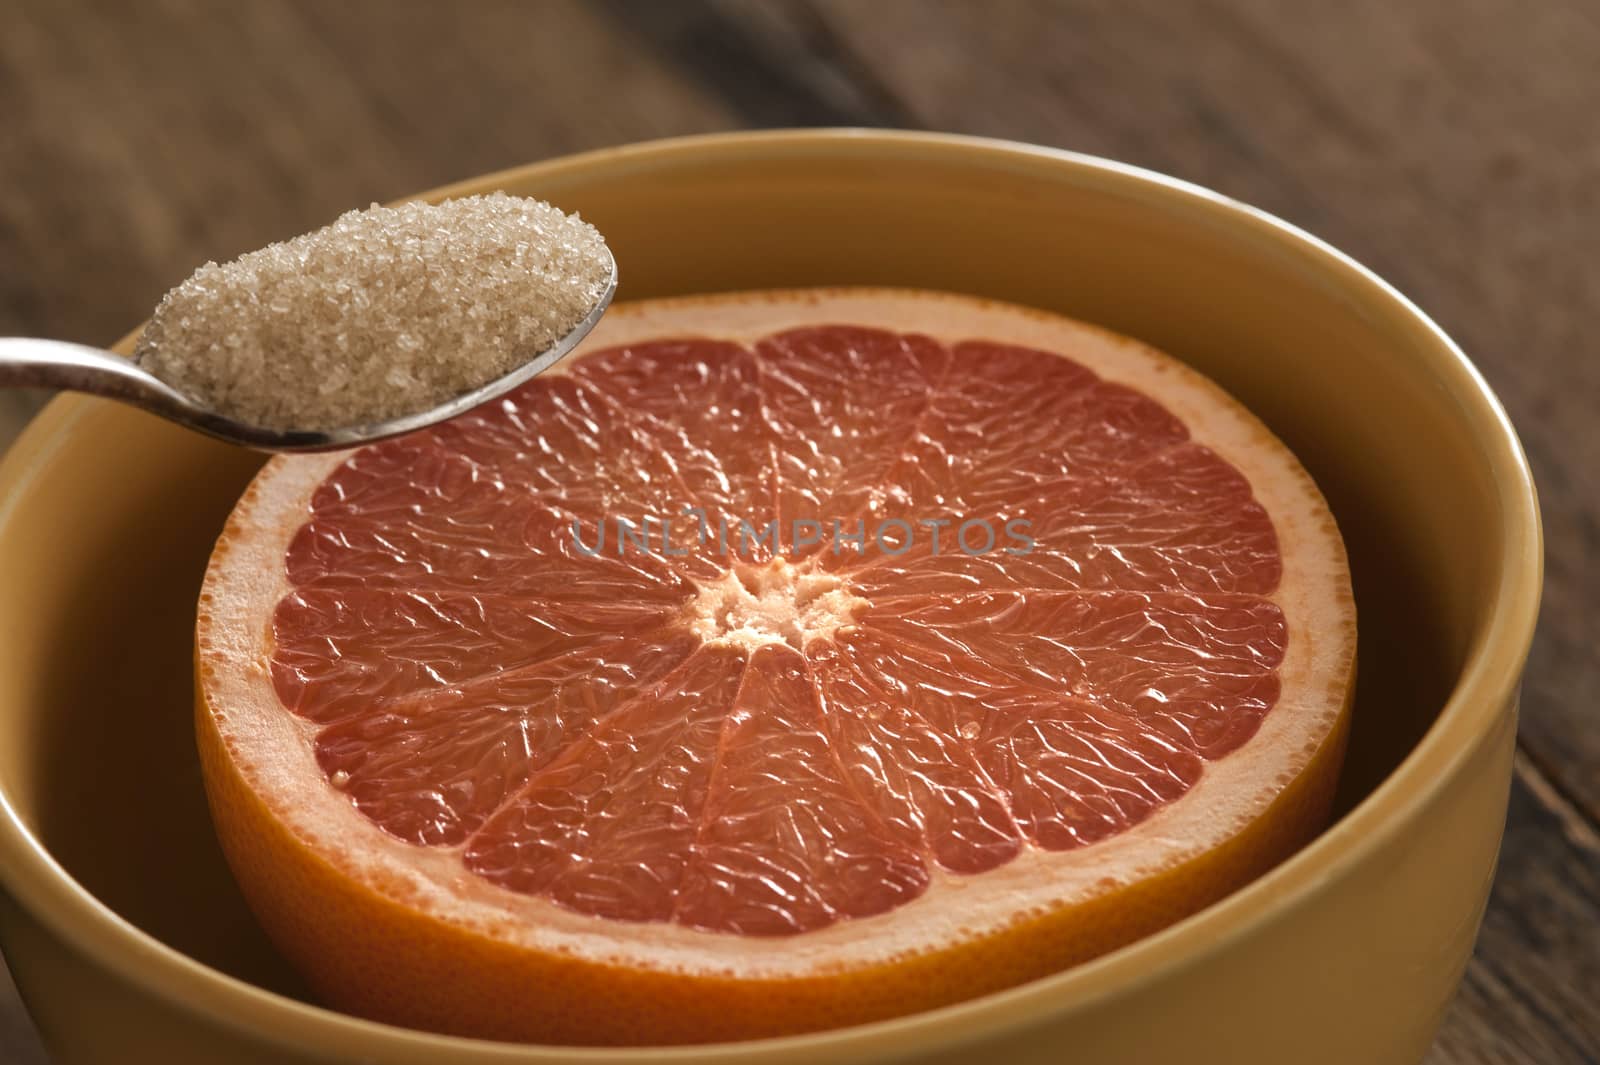 Close up of spoon with full of brown sugar being held above a freshly cut grapefruit half in bowl